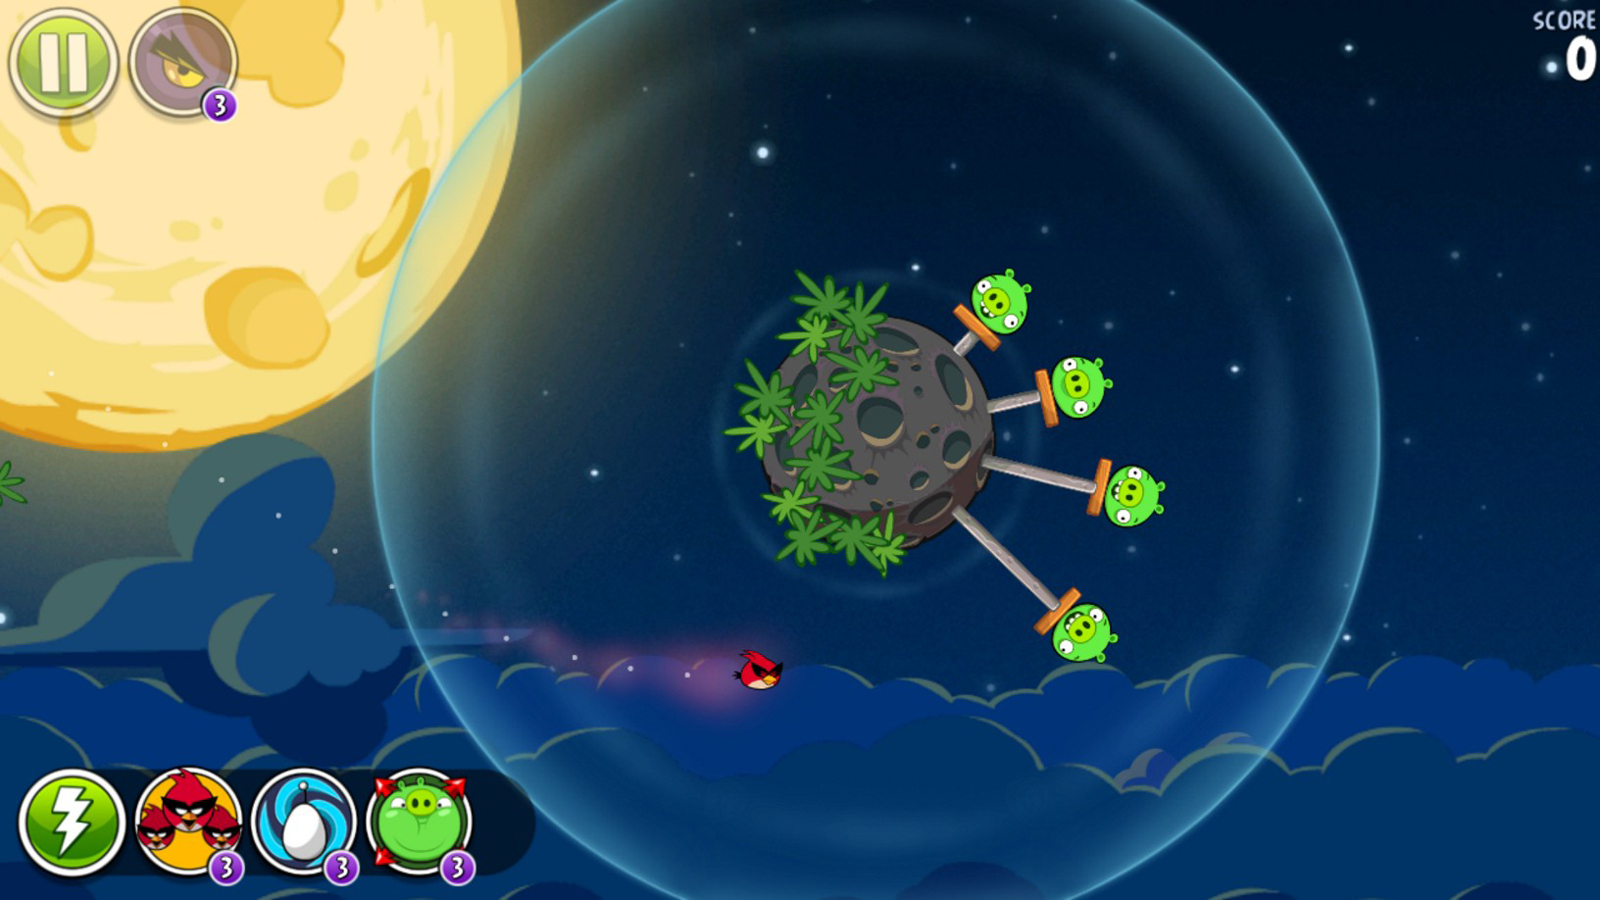 12. Angry Birds Space